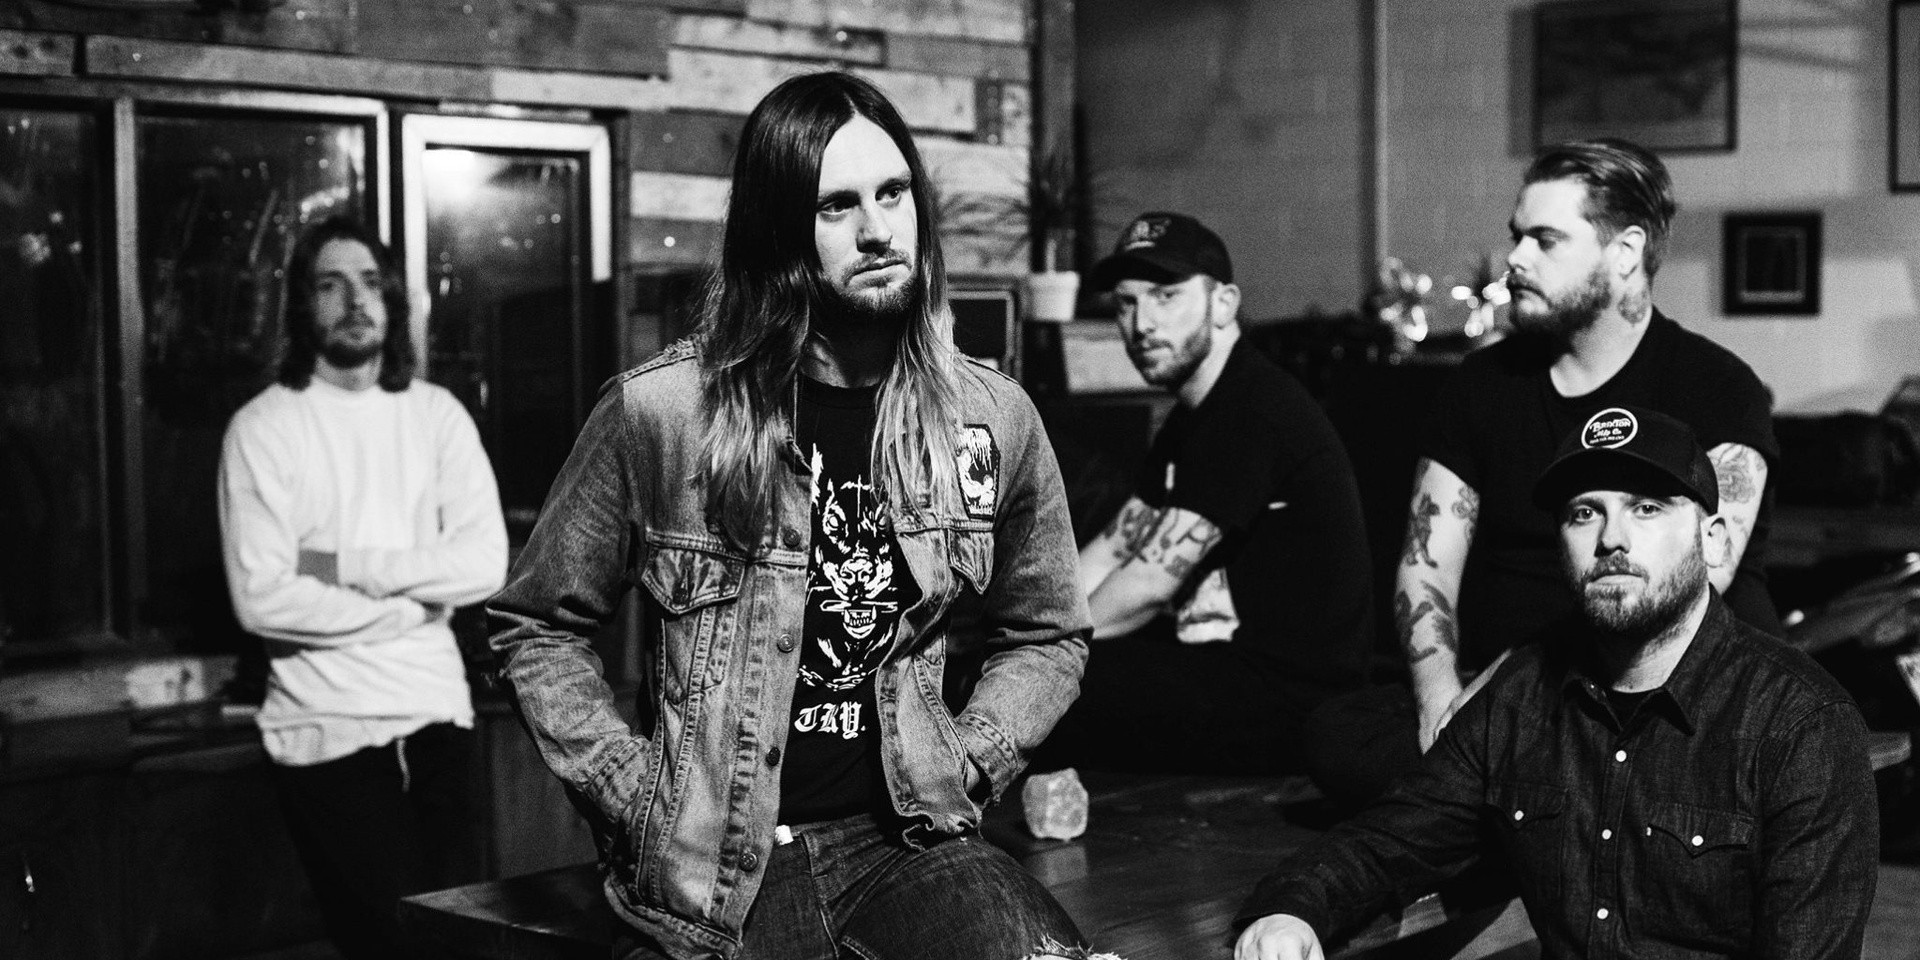 While She Sleeps to perform with Bring Me The Horizon in Singapore